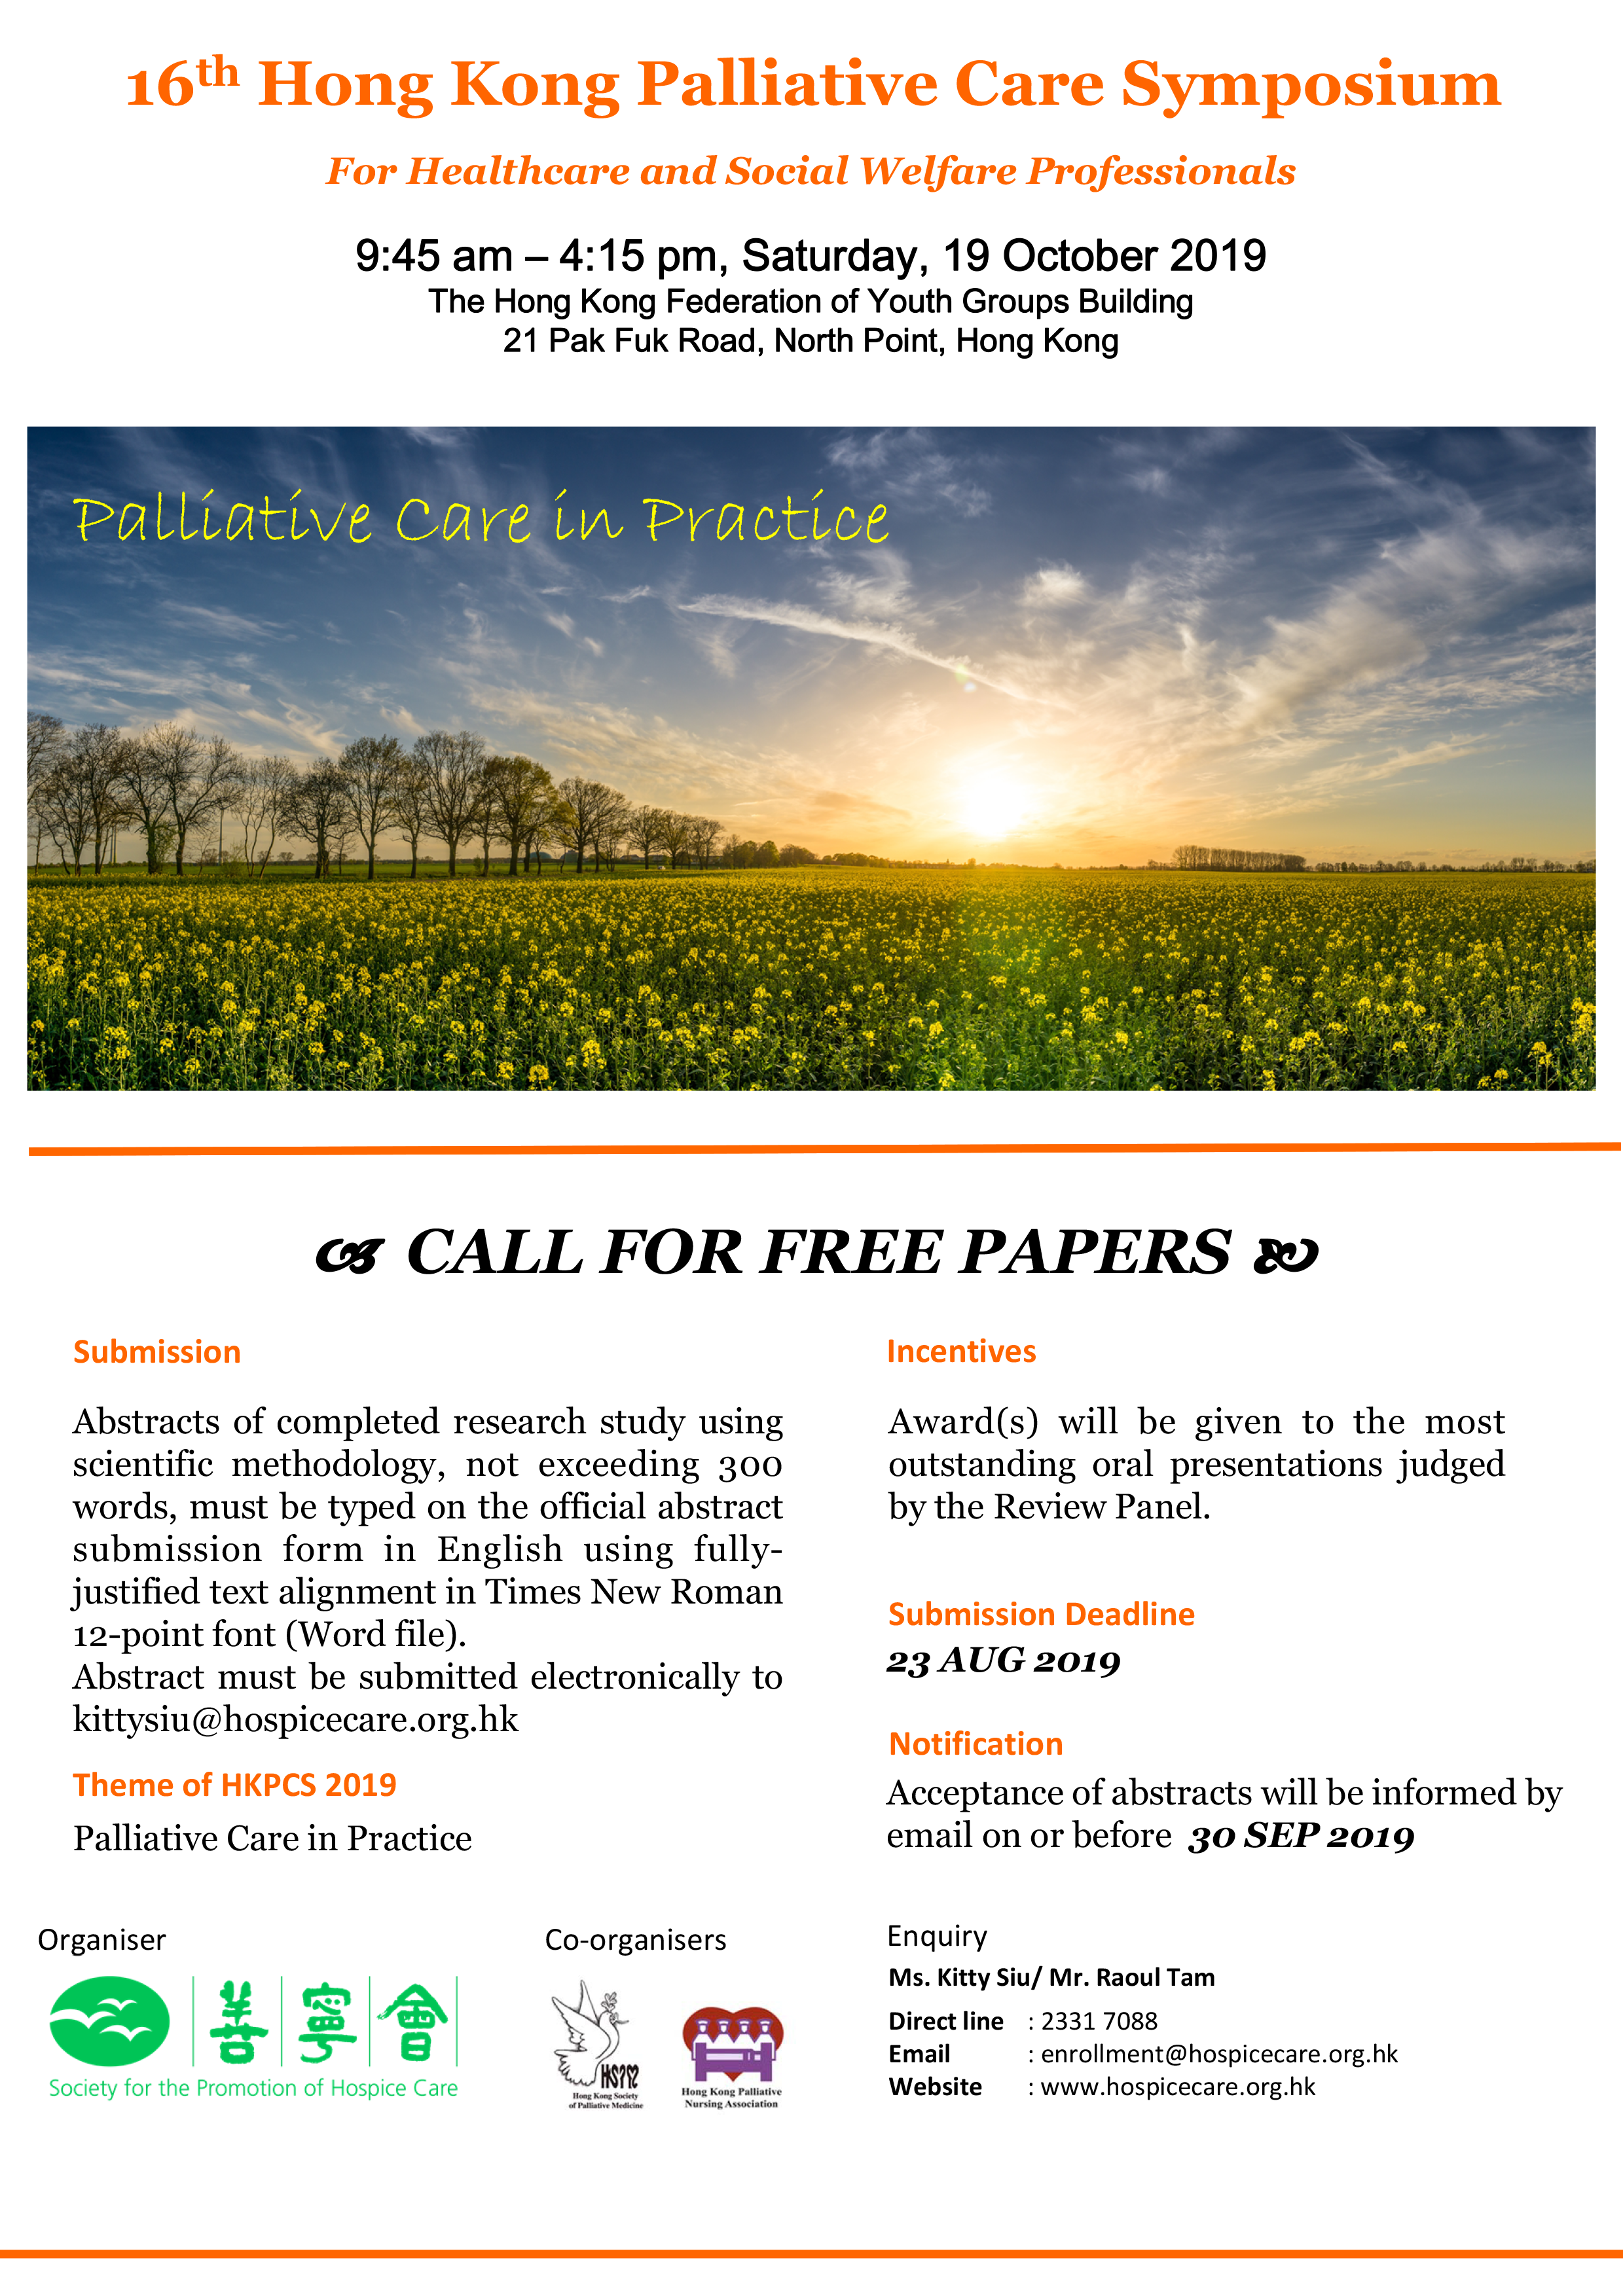 Call for Free Papers